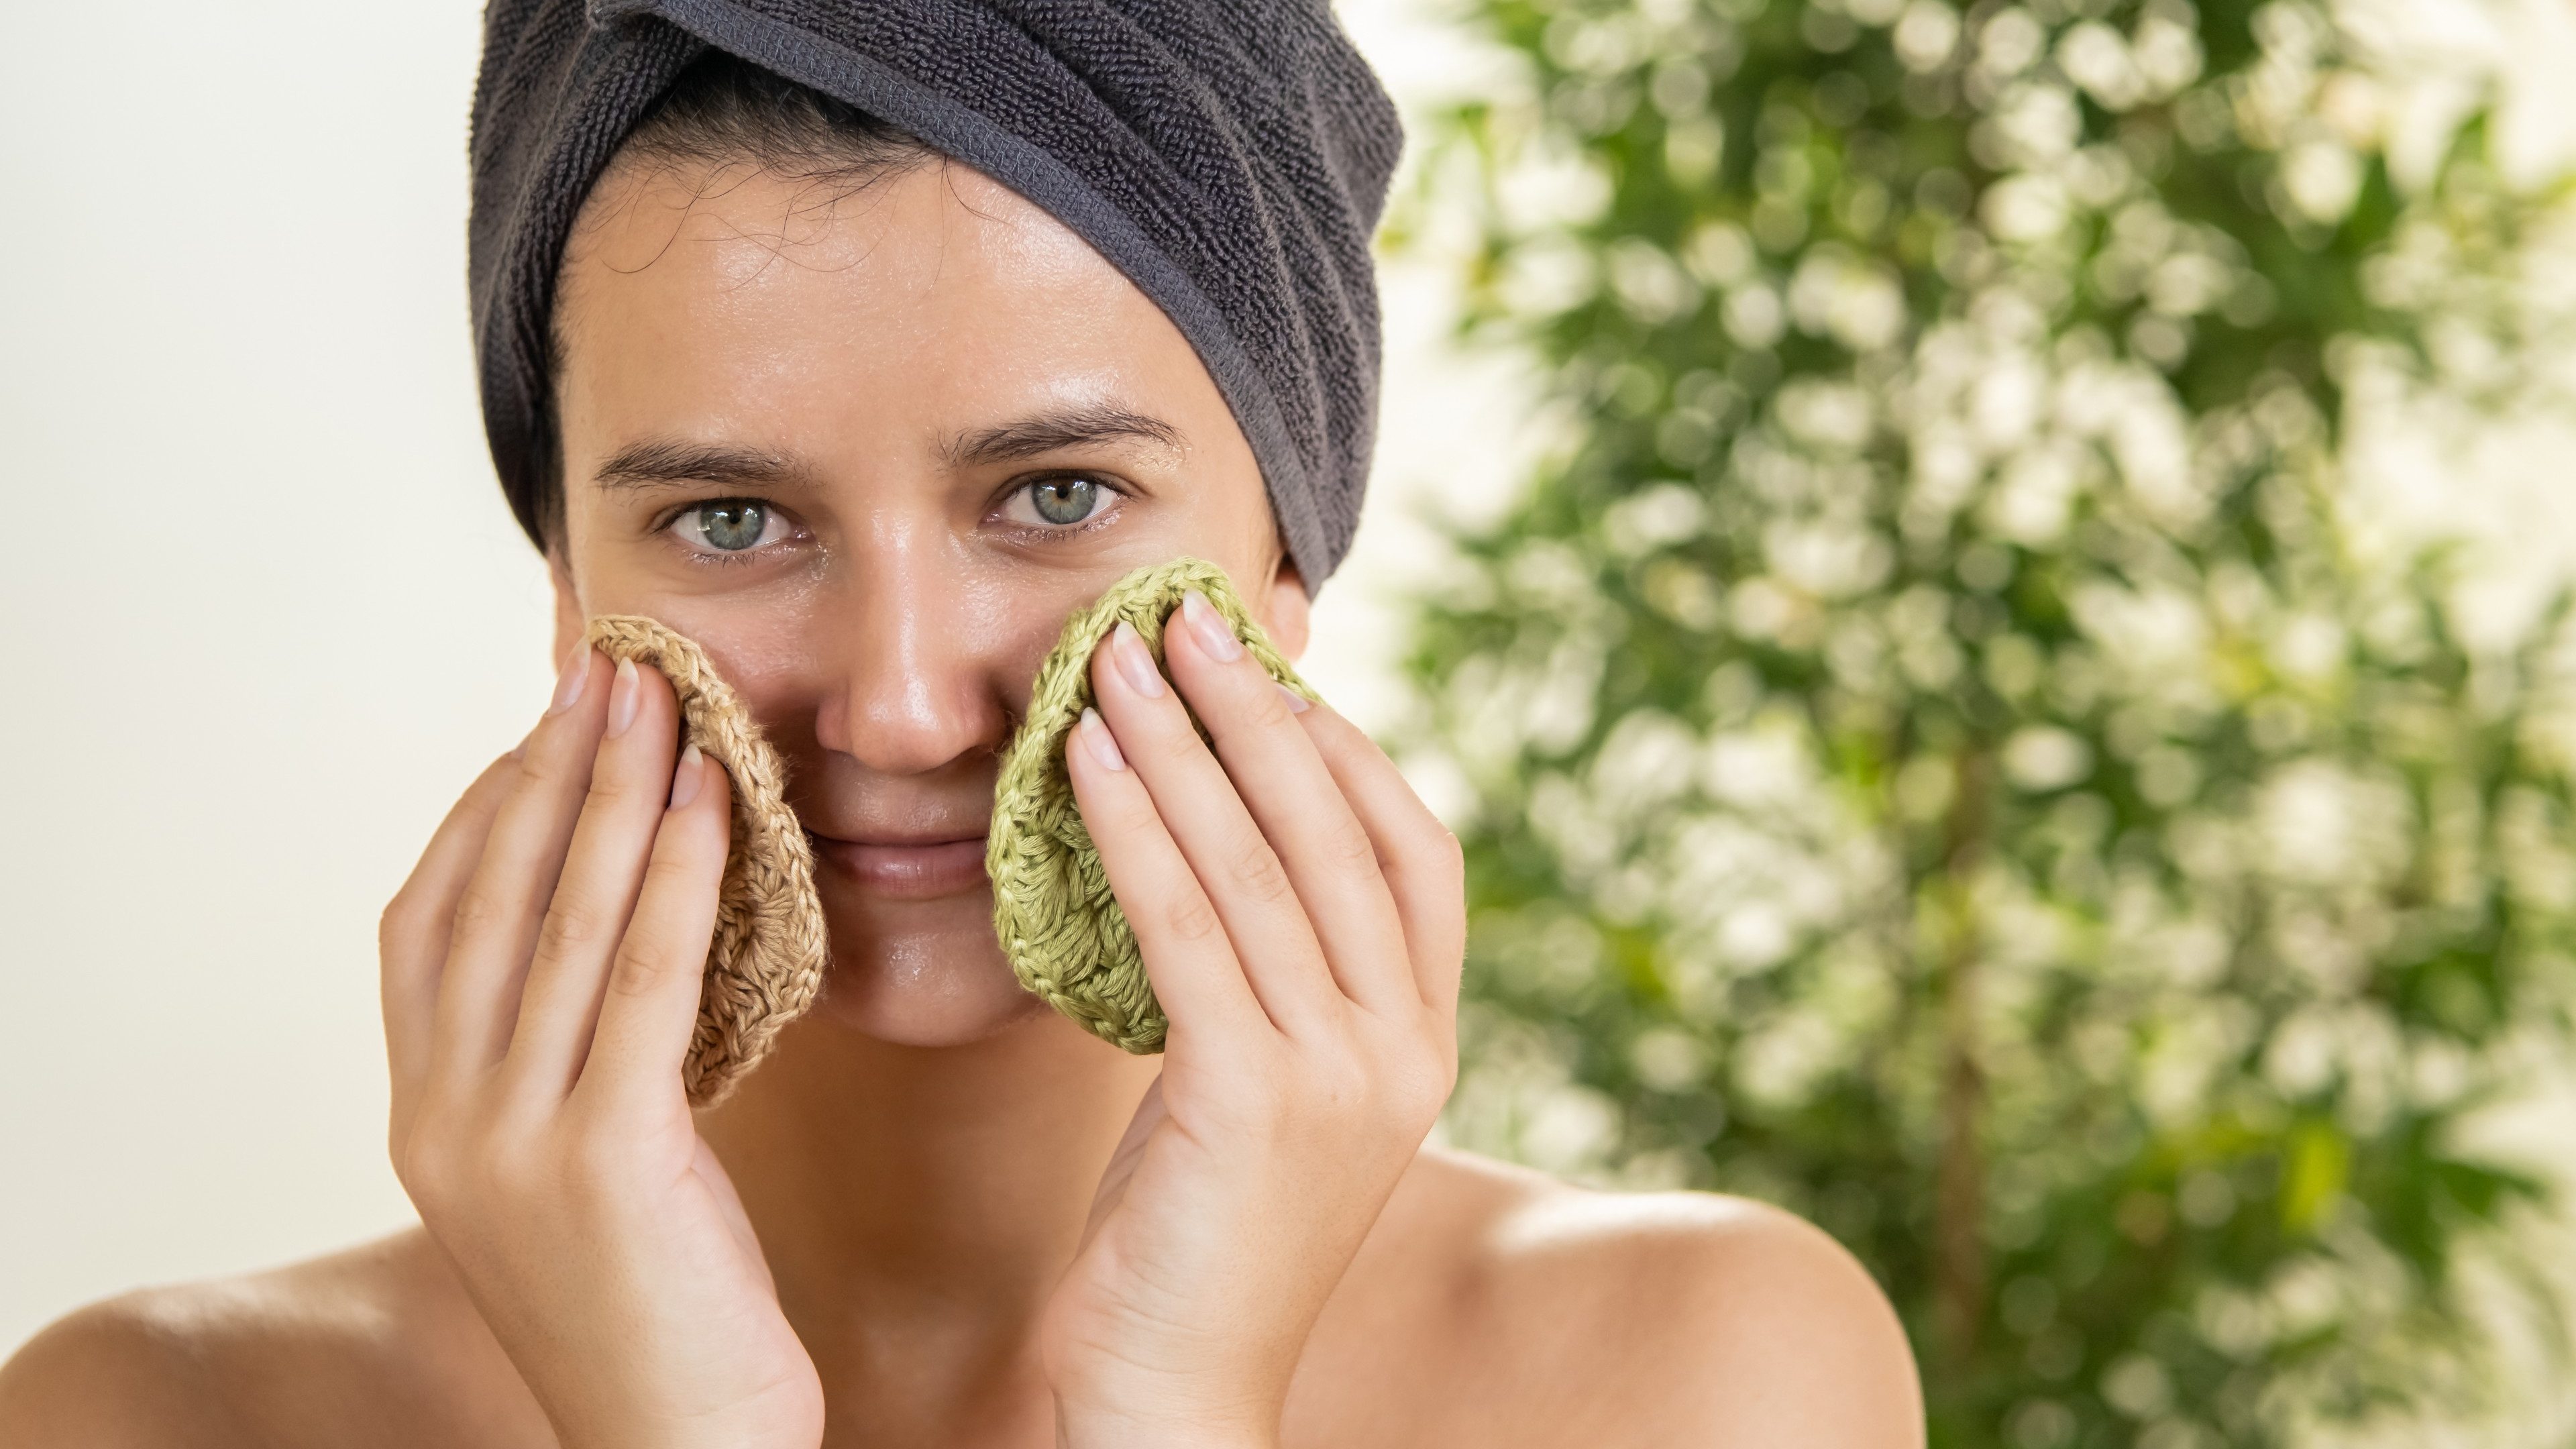 Young woman washing her face with reusable crocheted pads in bathroom. DIY washable knitted makeup remover cloth. Eco-friendly cosmetic products. Zero waste and sustainable plastic free lifestyle